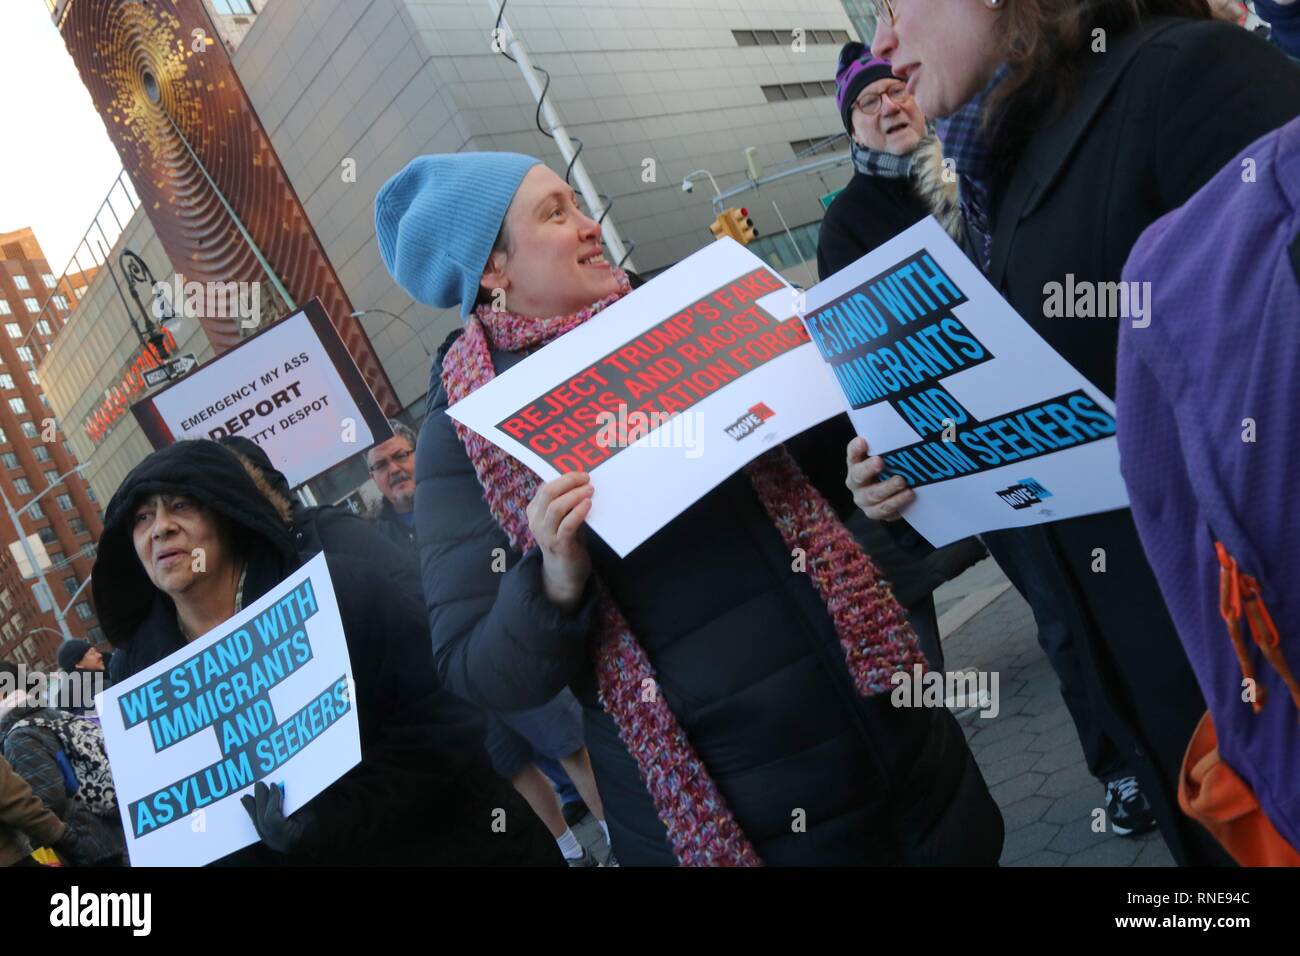 New York, NY, USA.  18th Feb, 2019. Large crowd rallied at Union Square on 18 February, 2019 in response to  Indivisible National call to action for nationwide protests against  U.S. President Donald Trump’s illegitimate use of emergency powers on President’s Day. Several other protests were held in other American cities on this national holiday celebration of past U.S. presidents.  © 2019 G. Ronald Lopez/DigiPixsAgain.us/Alamy Live News Stock Photo